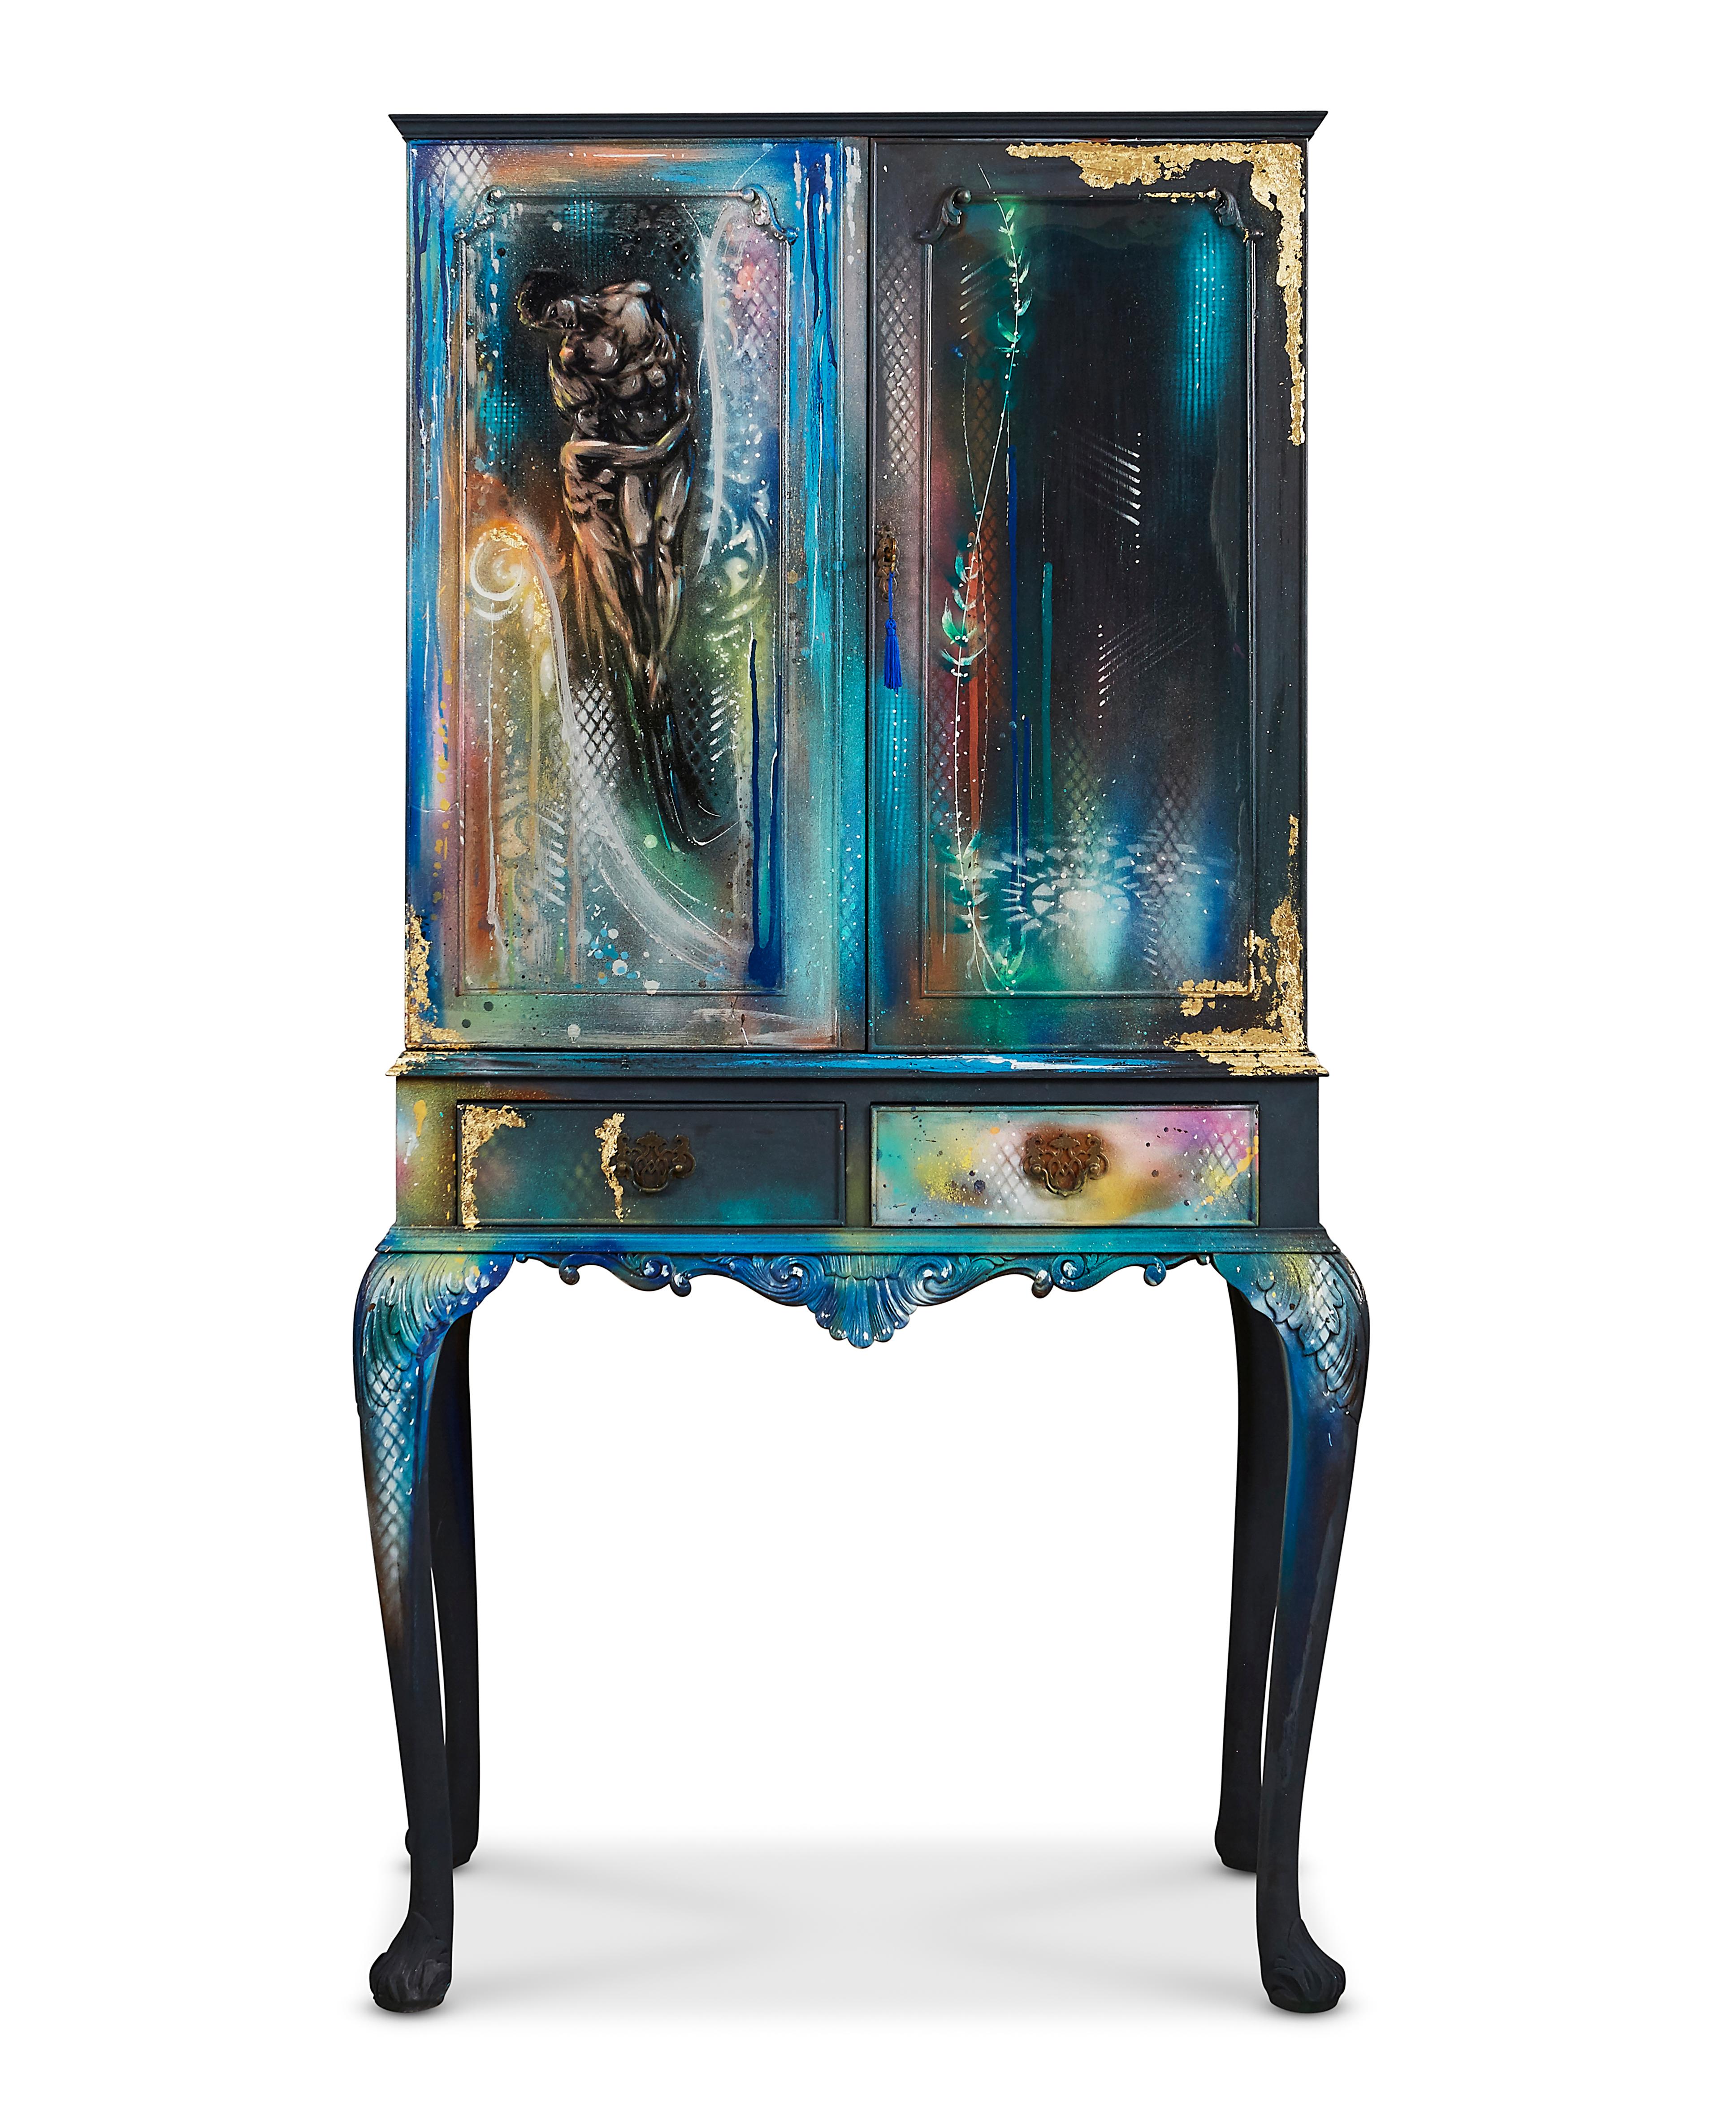 Mermaid - wooden Drinks cabinet - furniture Art on Furniture  - Mixed Media Art by Lazarus